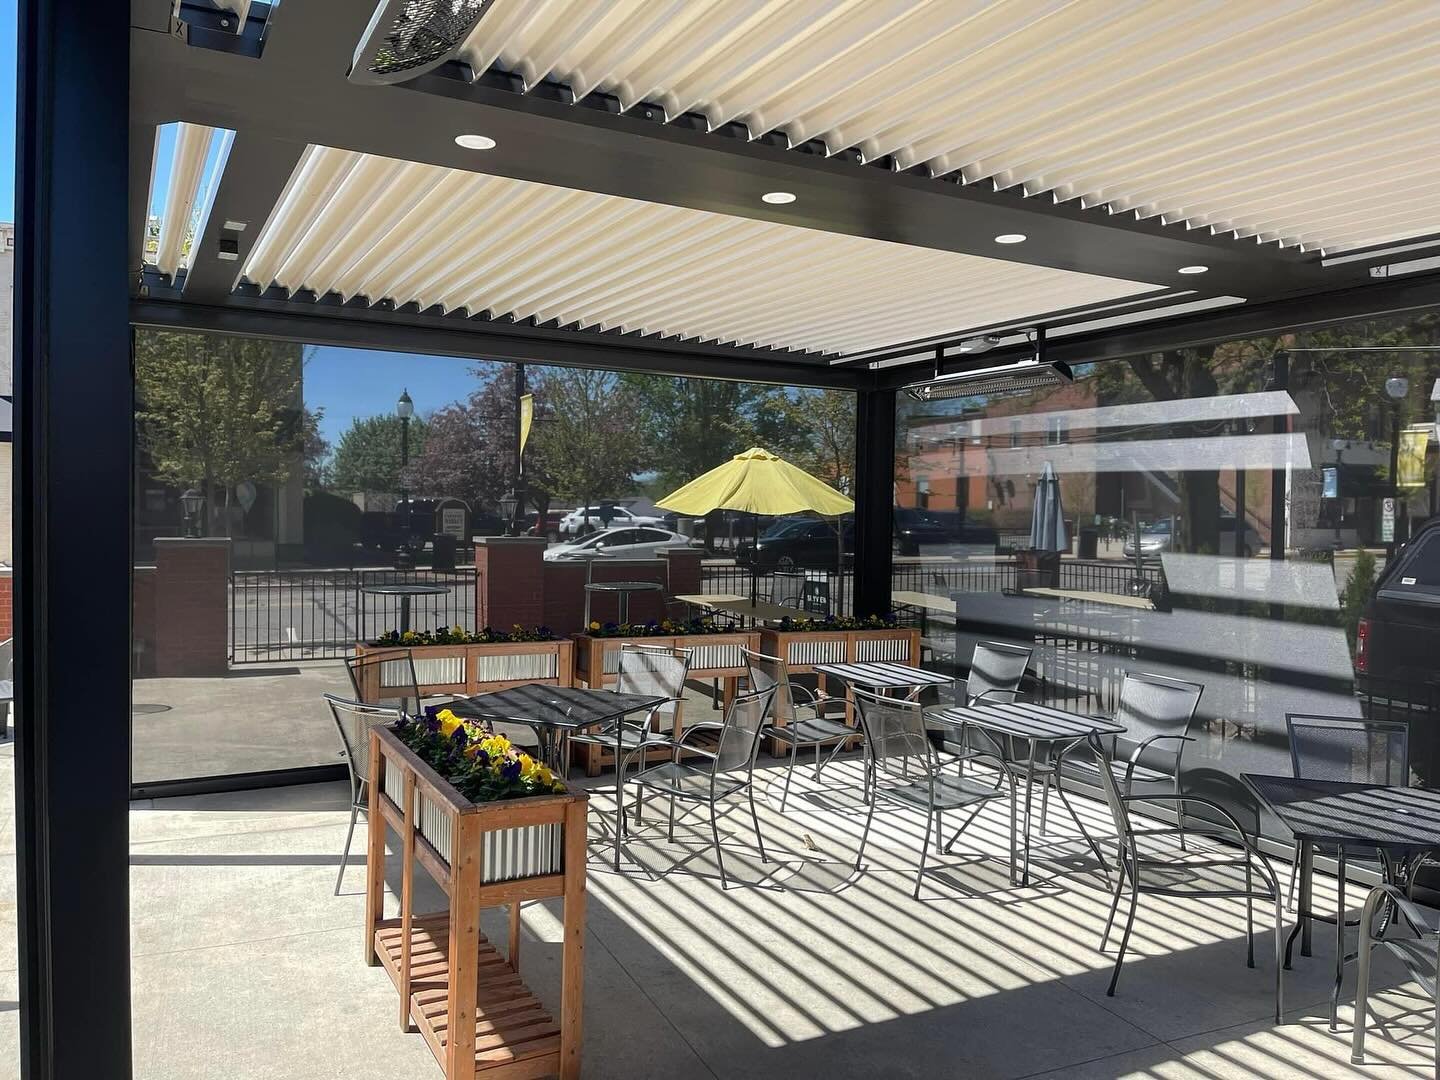 Rain, wind or shine&hellip;it&rsquo;s patio time!

The pergola is officially open!  Sincere appreciation to our supporters for helping us make this happen!  It&rsquo;s pretty awesome!